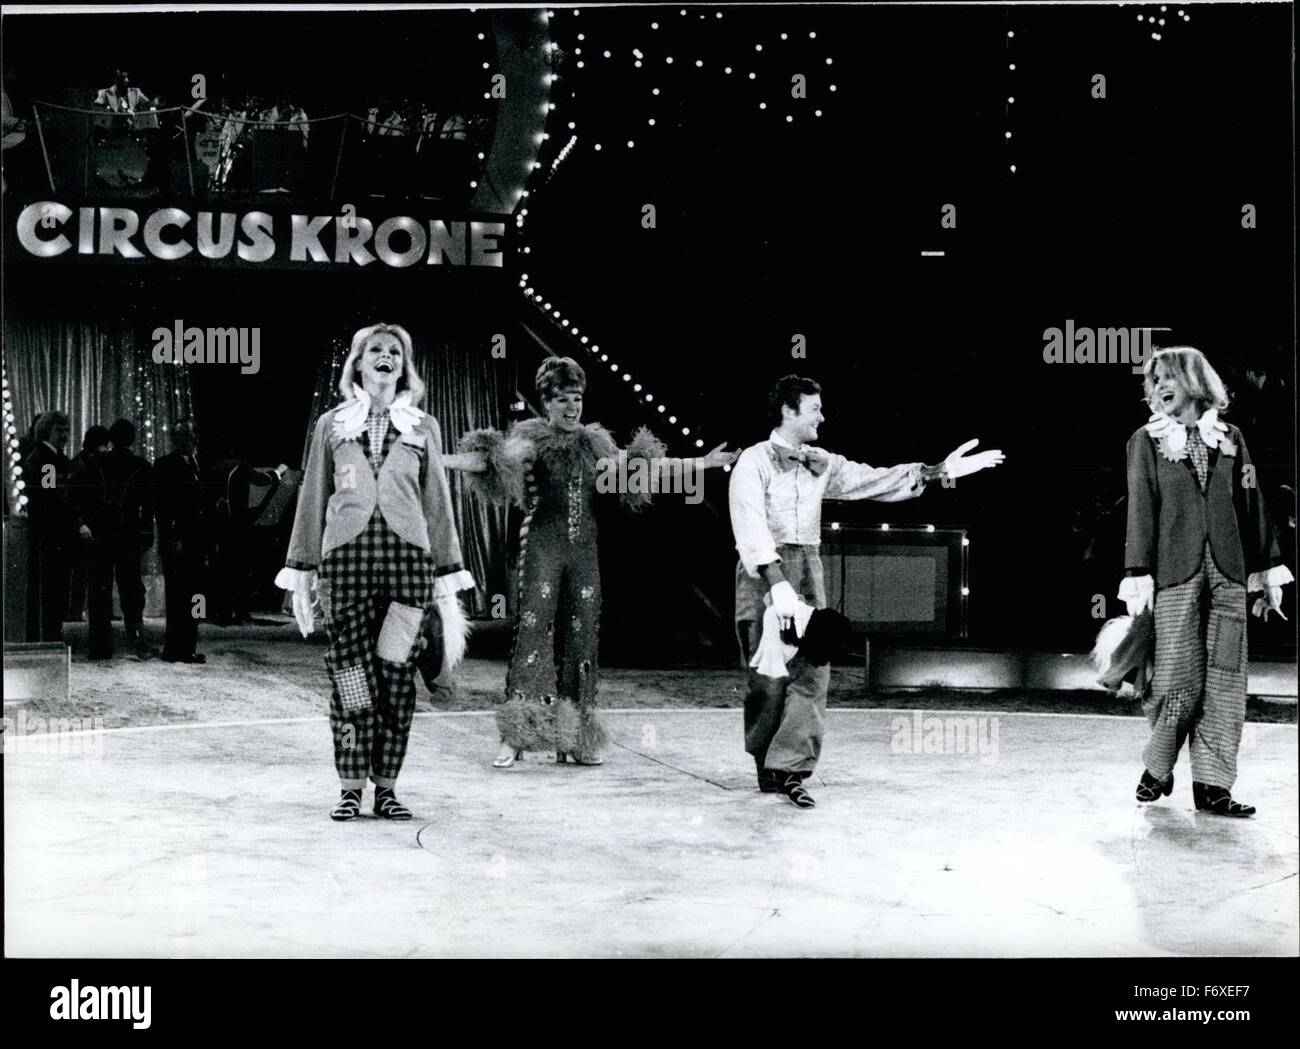 1978 - ''Star In The Manege'' - Charity Performance In Munich: ''Stars in the Munich''.under this motto a very interesting performance took place on November 30th, 1978 in the Munich/West-Germany Circus Krone. This annual benefit-gala is Organized by a Munich Newspapaer (''Abendzeitung'') and the net profit will be used to help old Artists and journalists. Every year, and also ion 1978, a great lot of stars -singers, dancers, actors a.s.o. - took part and are performing themselves as clowns, tamers, rope dancers f.e. Photo Shows Famous Alice and Ellen Kessler (left to right) as Clowns (with Stock Photo